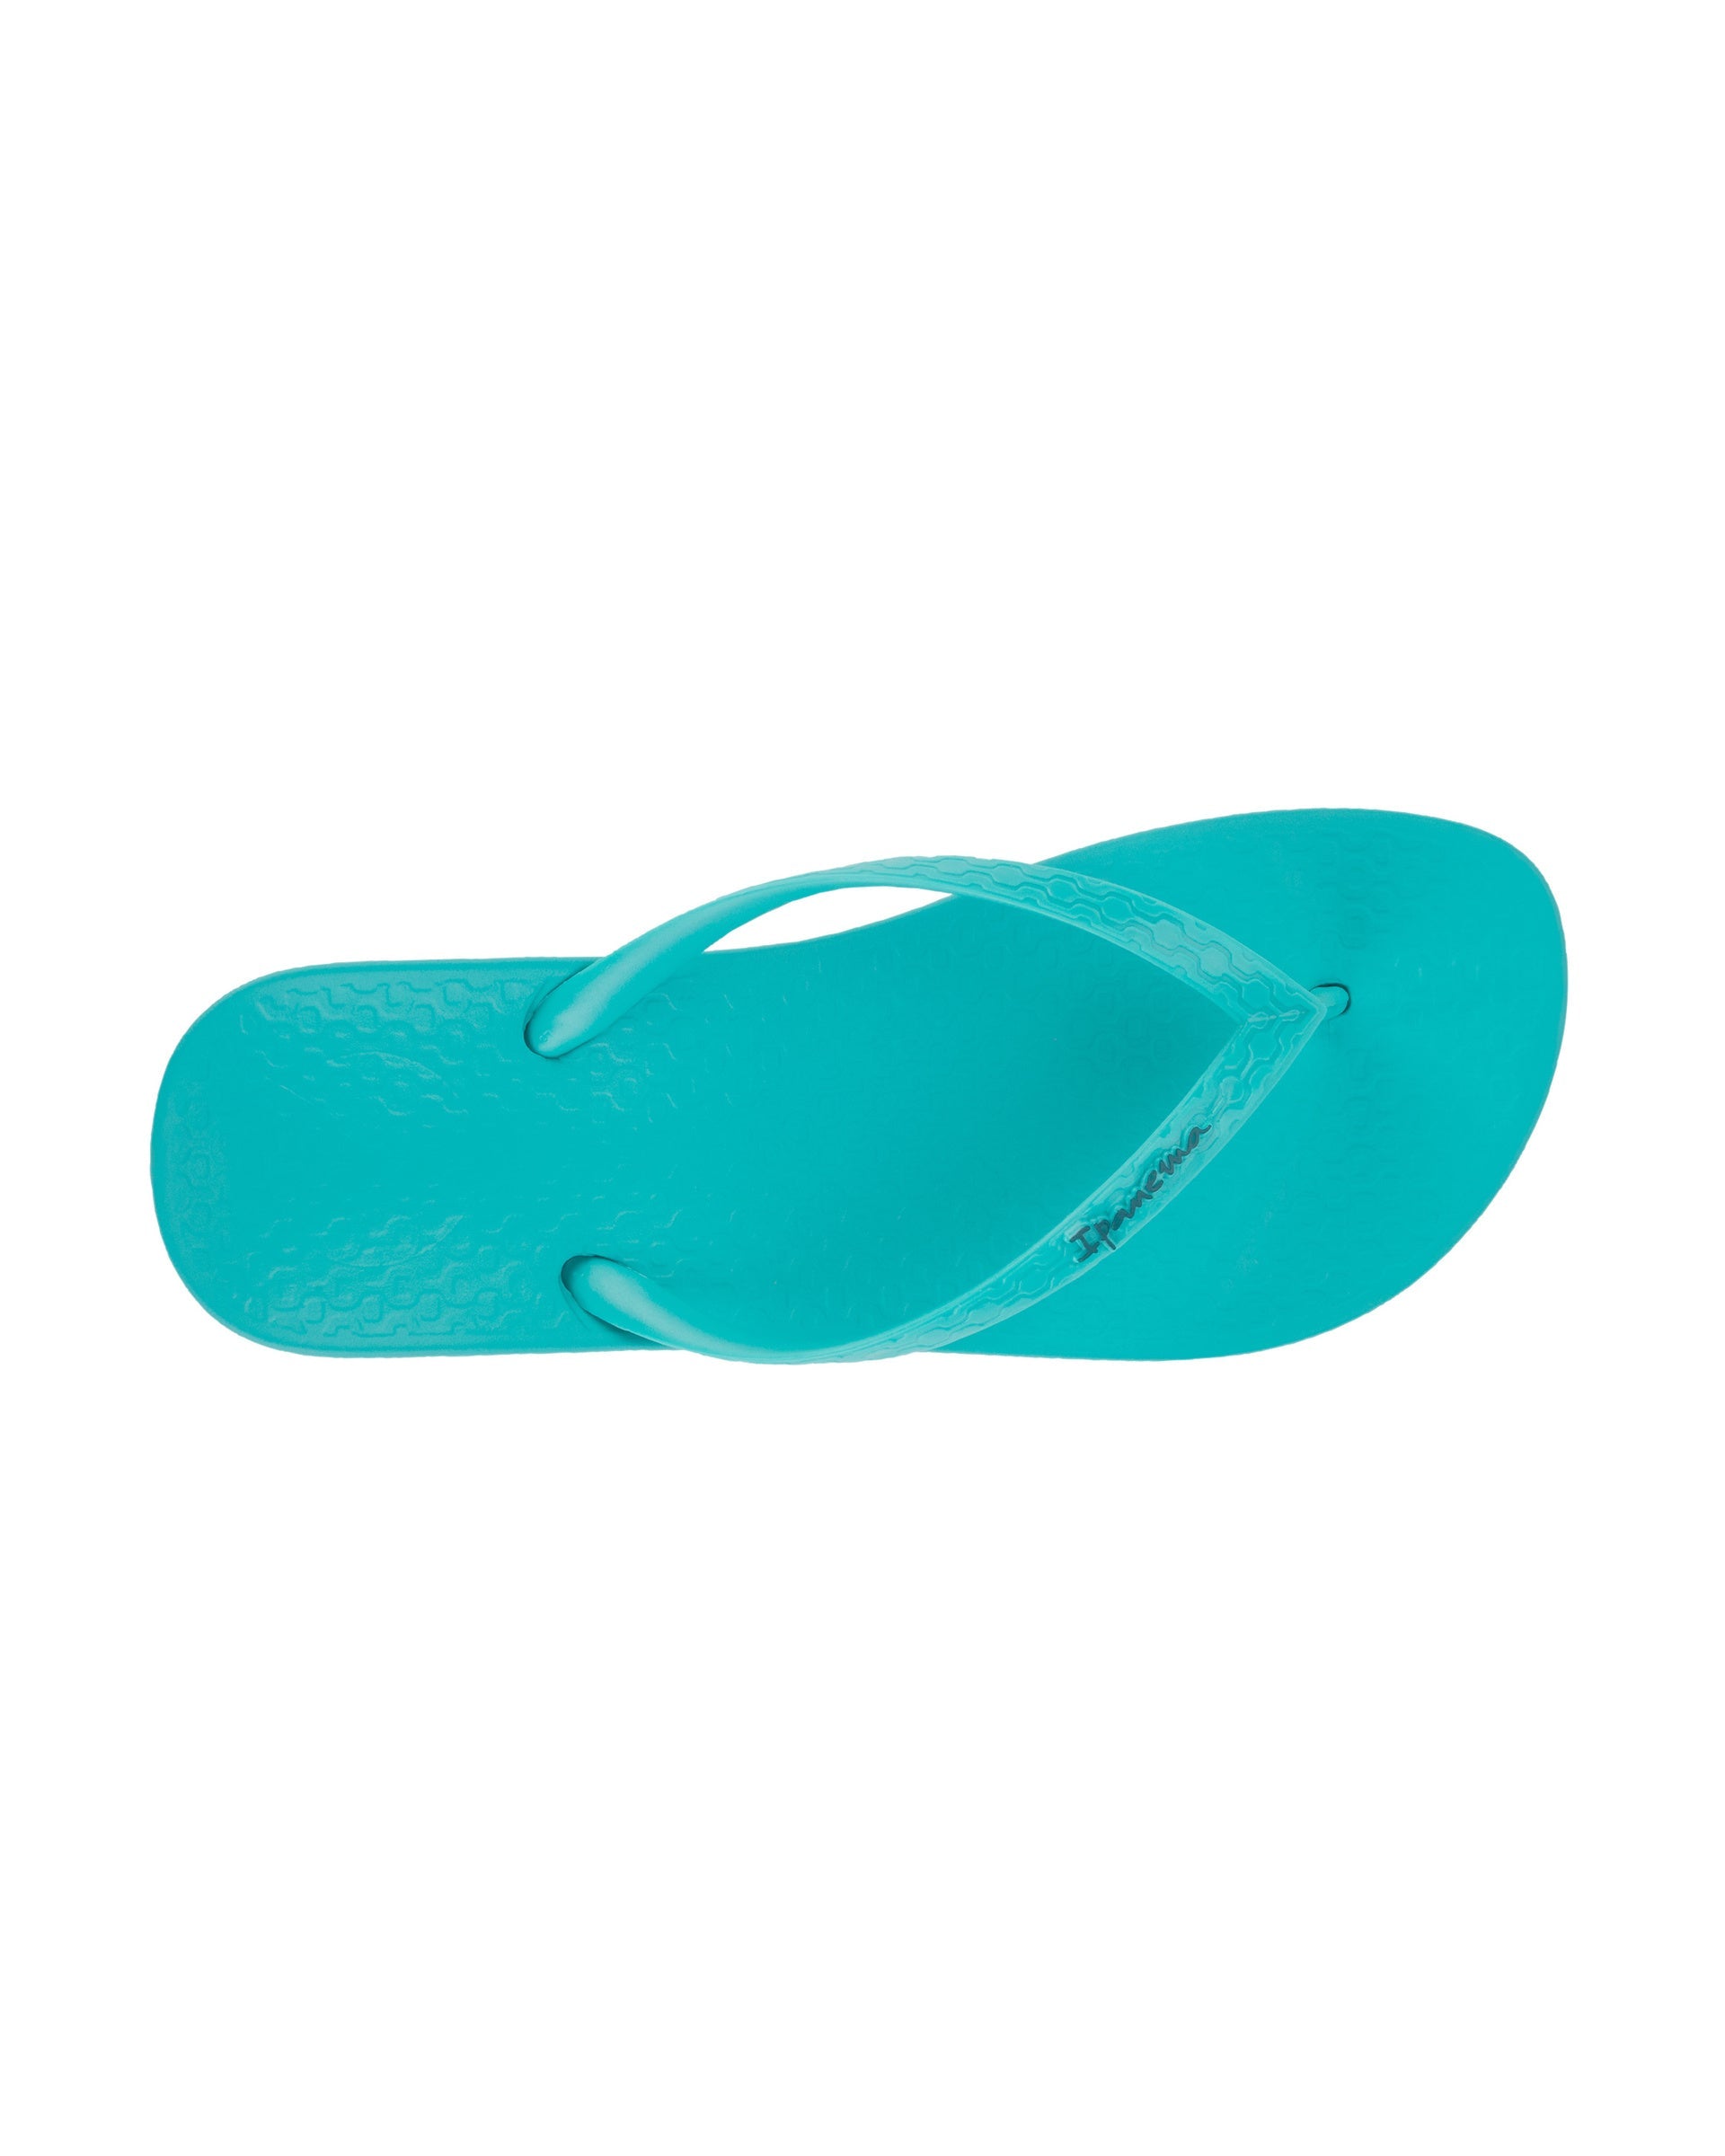 Top view of a blue Ipanema Ana Colors women's flip flop.